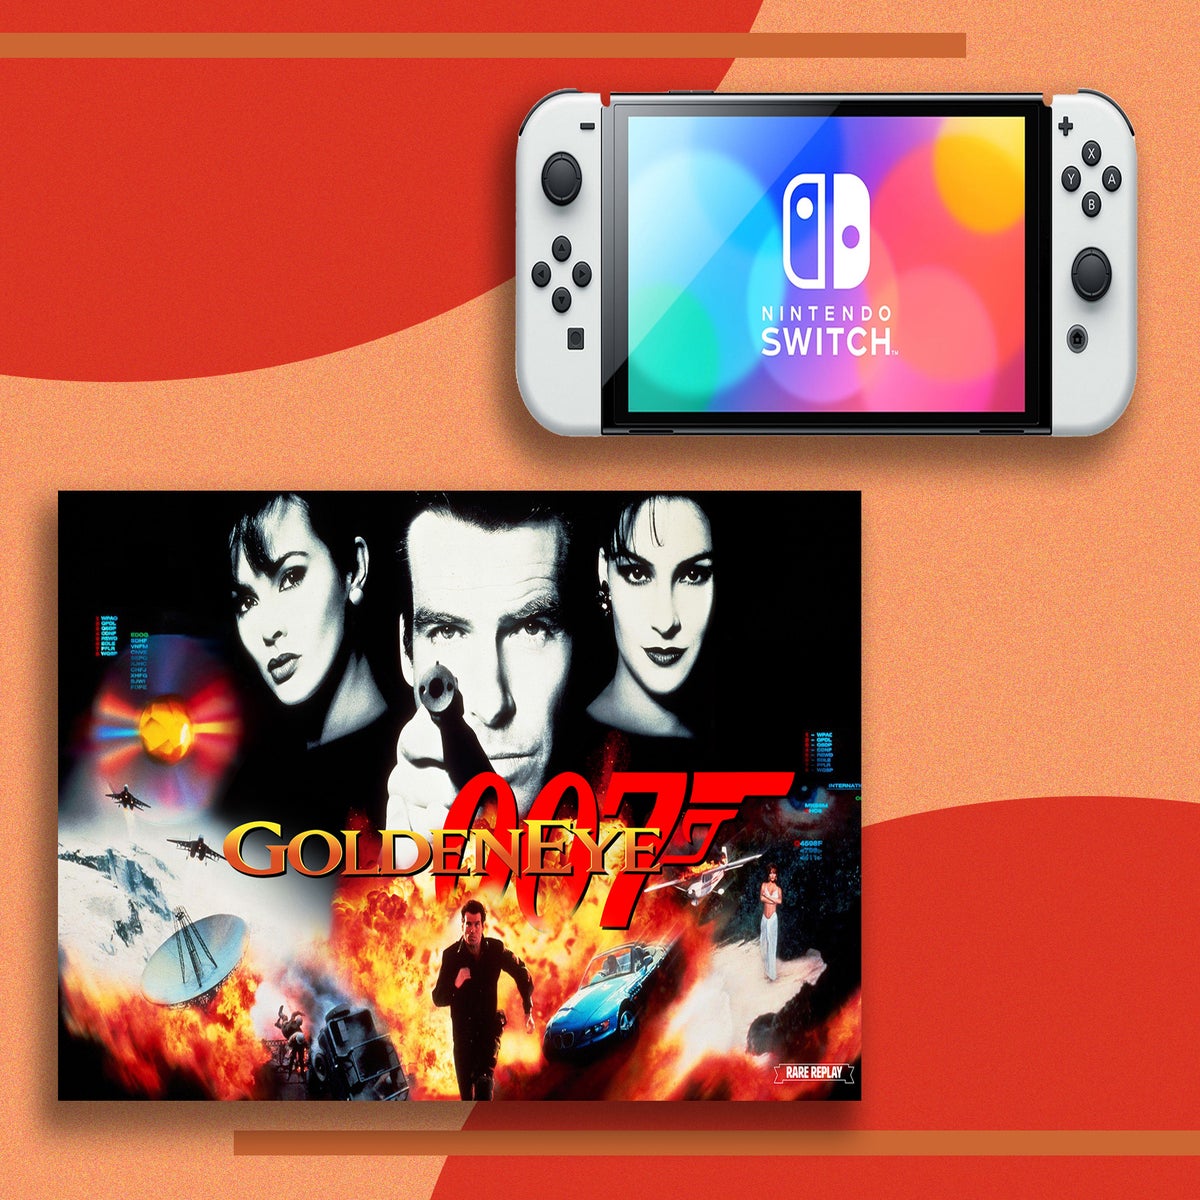 GoldenEye And Other Great Classics Heading To Nintendo Switch Online